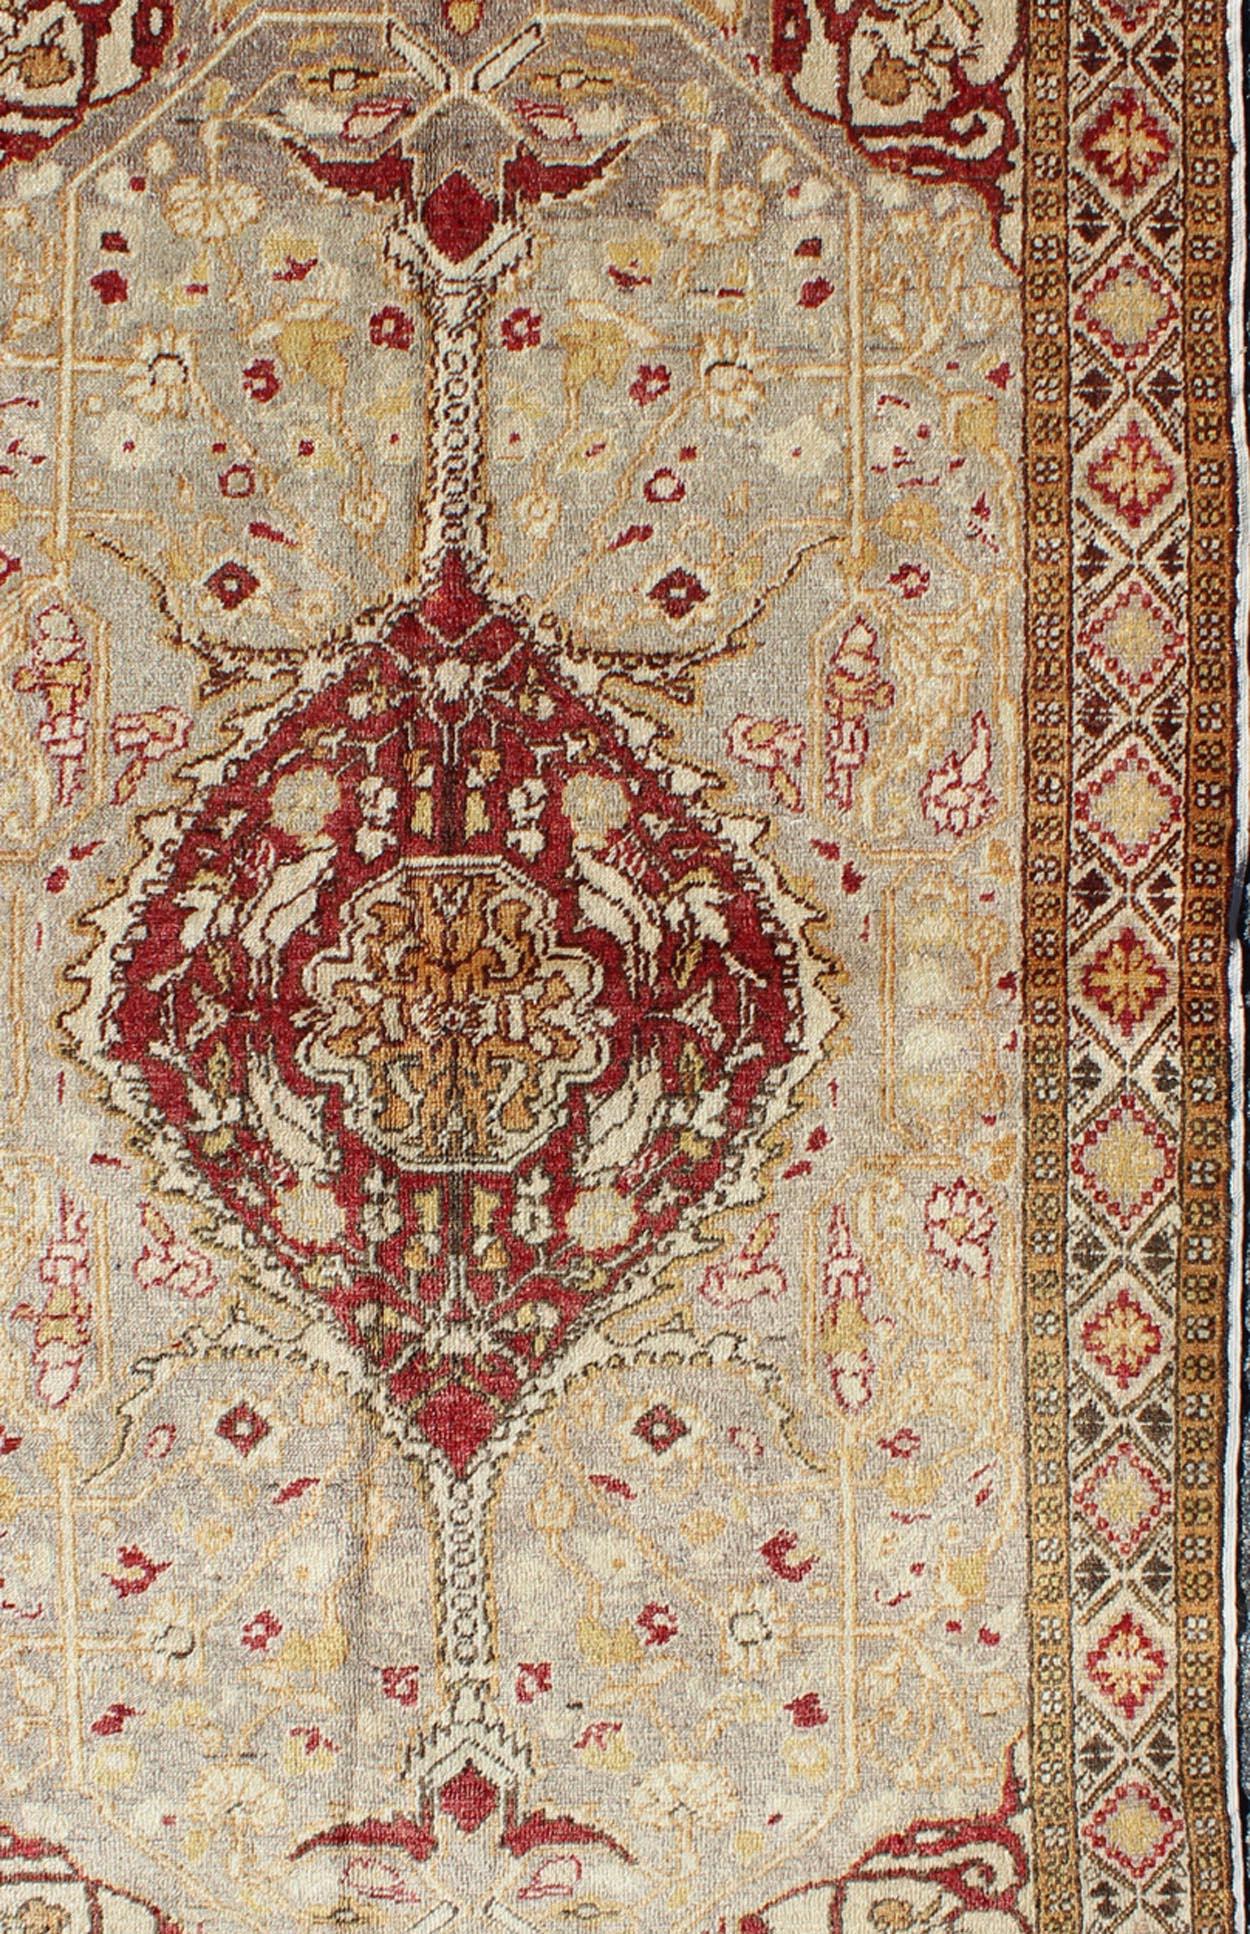 Measures: 4 x 6'8

This vintage Turkish Oushak carpet (circa mid-20th century) features a central medallion design, as well as patterns of smaller floral shapes and botanical elements in the four cornices, and geometric diamonds in the borders.